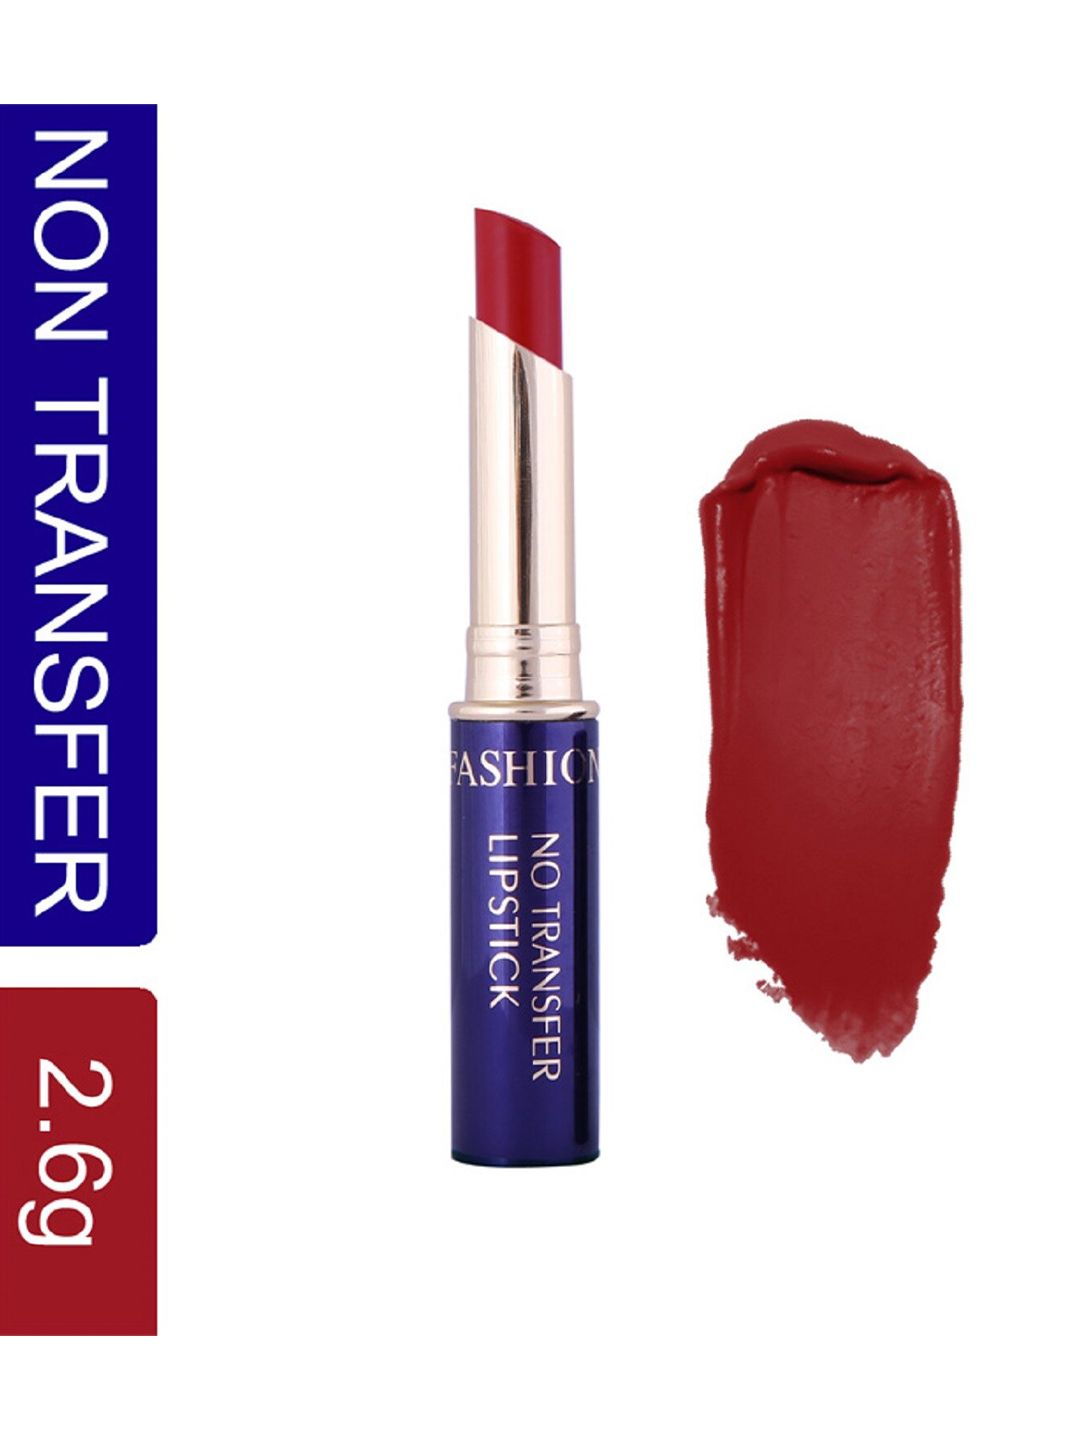 Fashion Colour No Transfer Matte Waterproof Lipstick 2.6 g - Jazz Red 55 Price in India